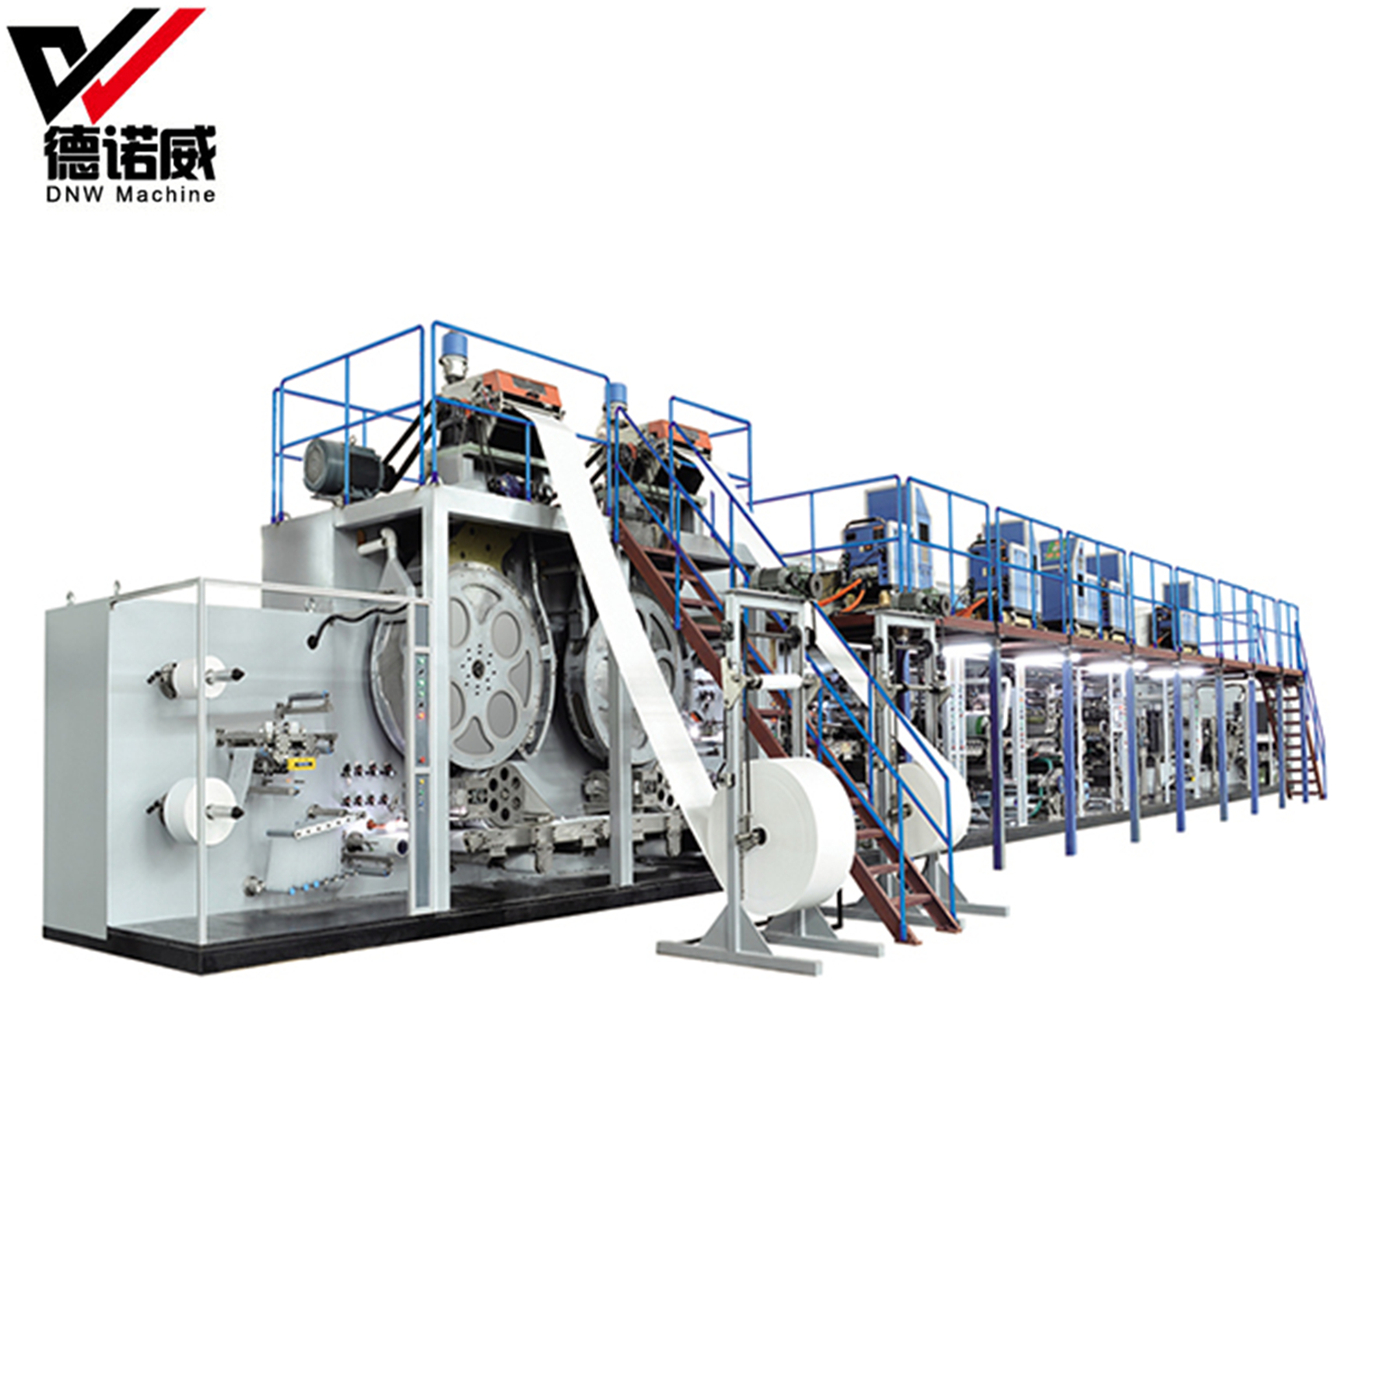 DNW-30 Automatic adult diaper making machine 